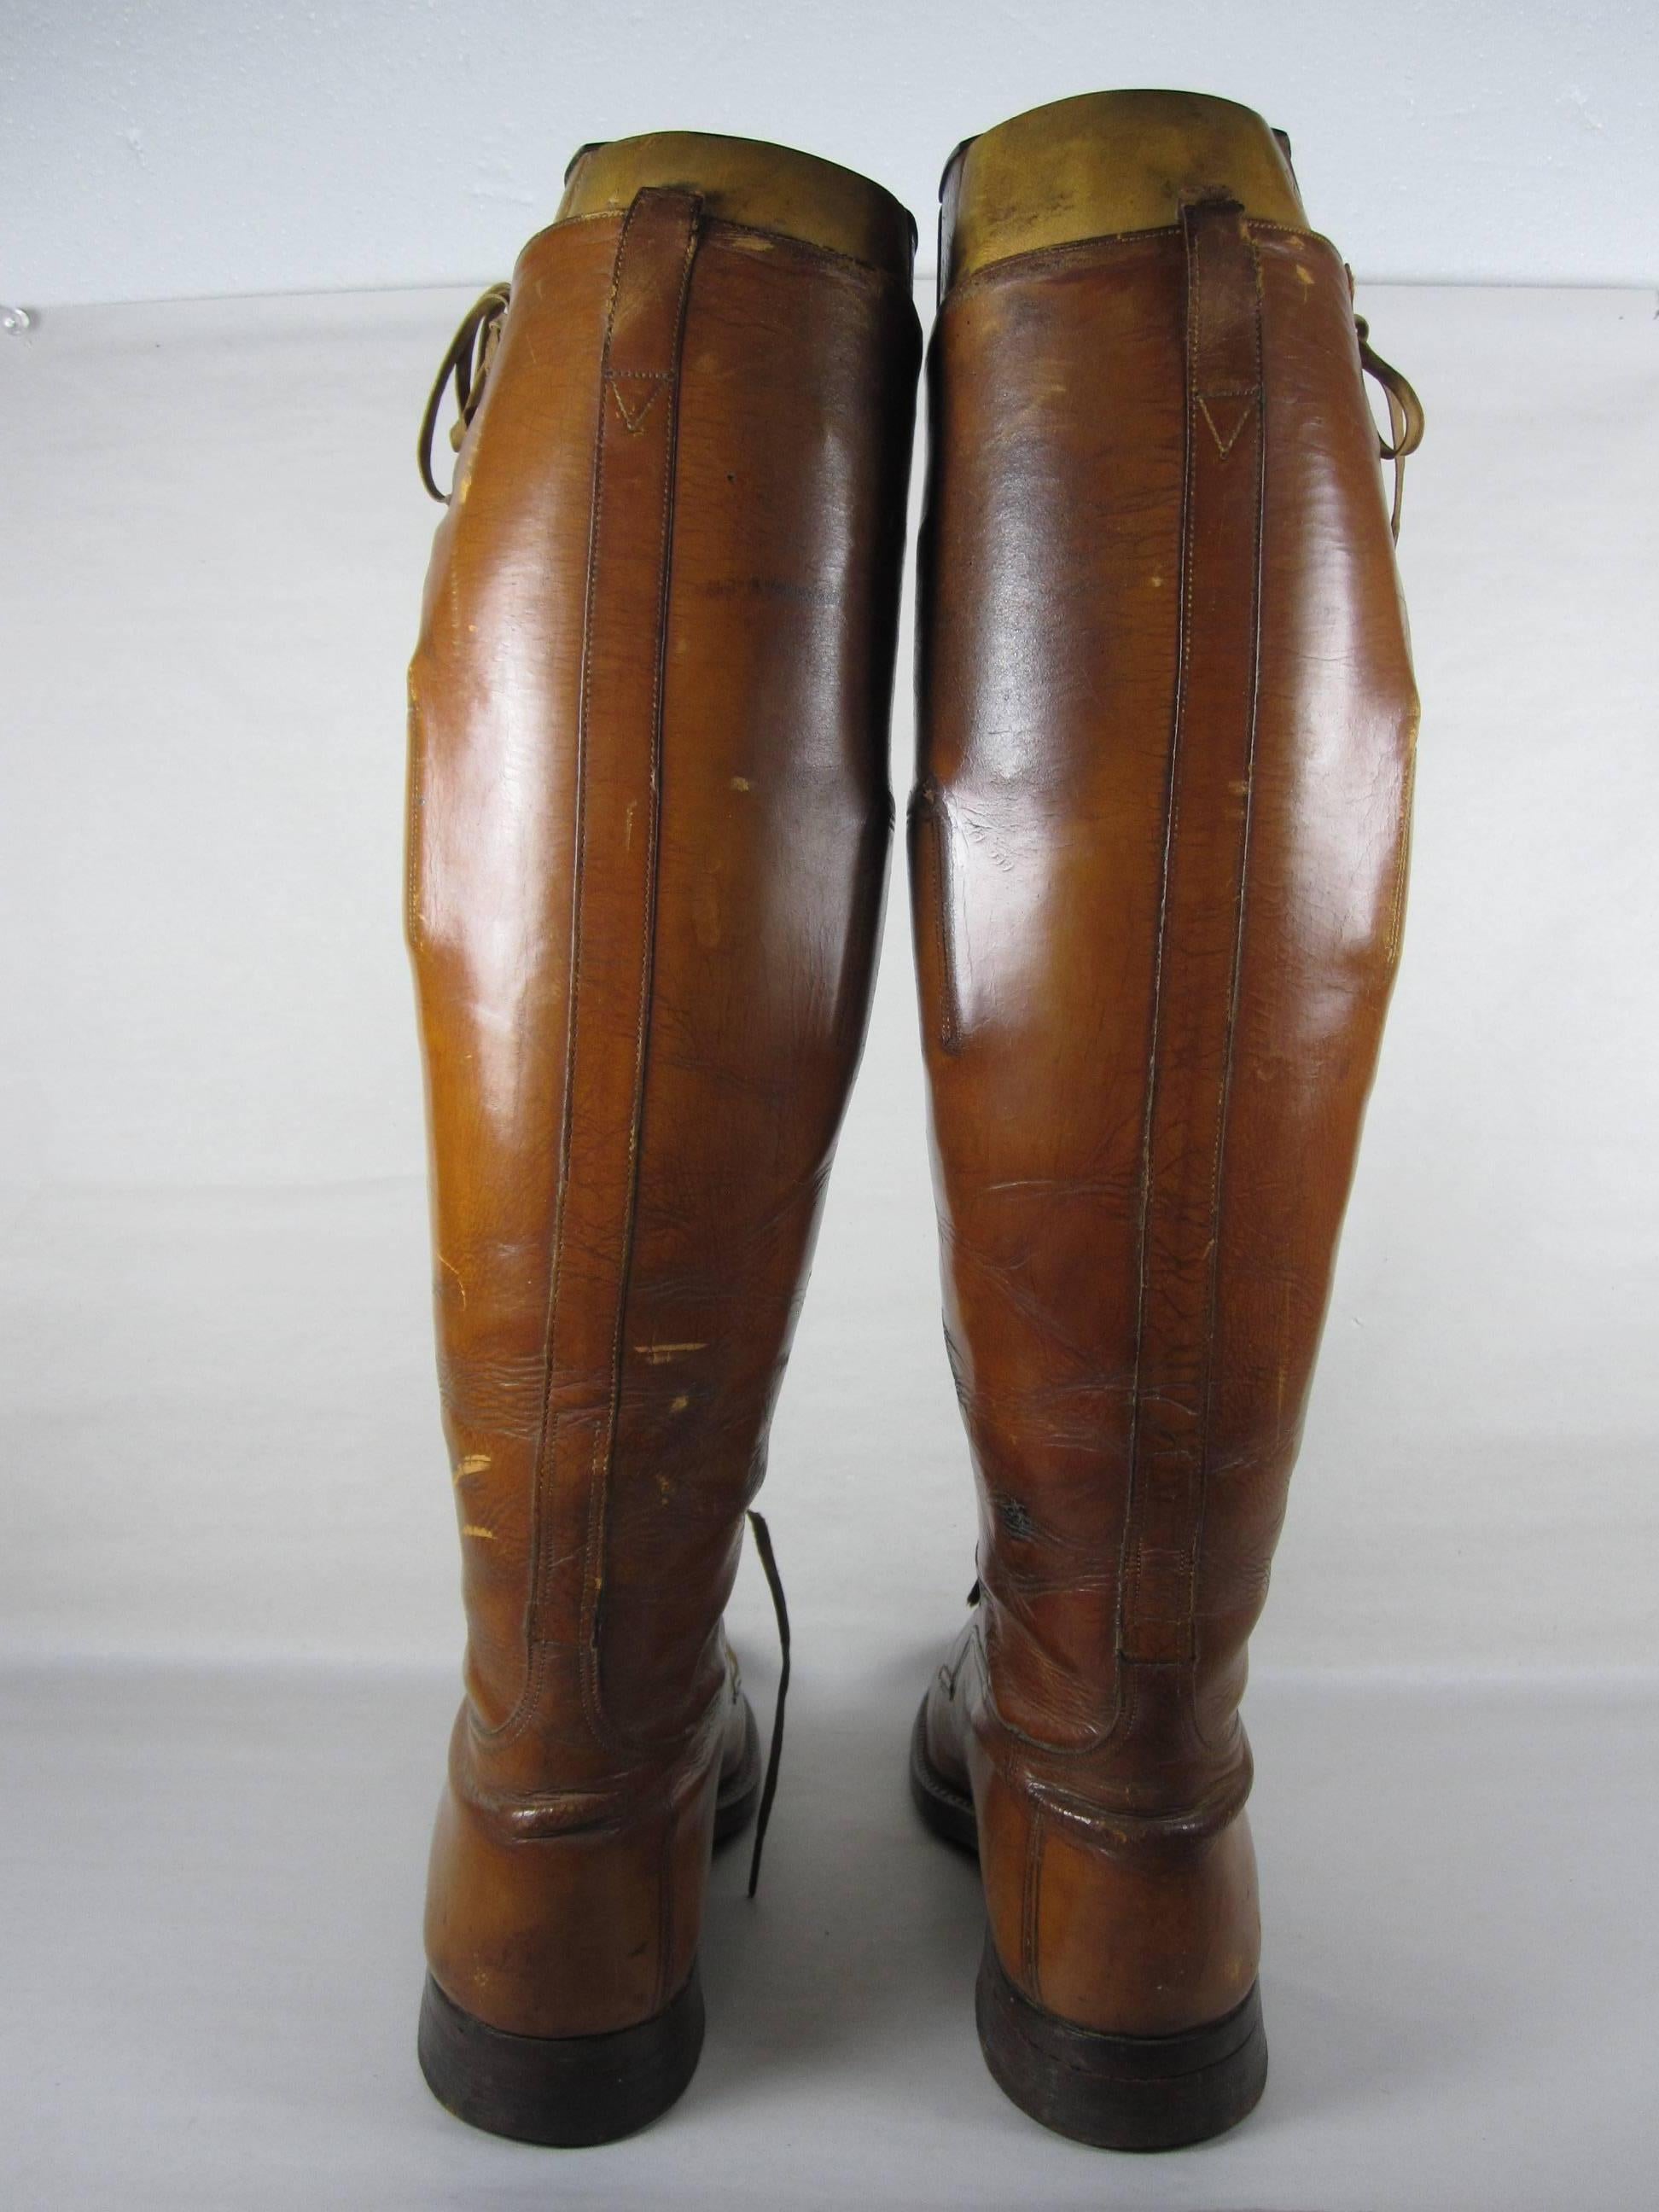 20th Century Edwardian English Equestrian Riding Boots with Original Wooden Trees